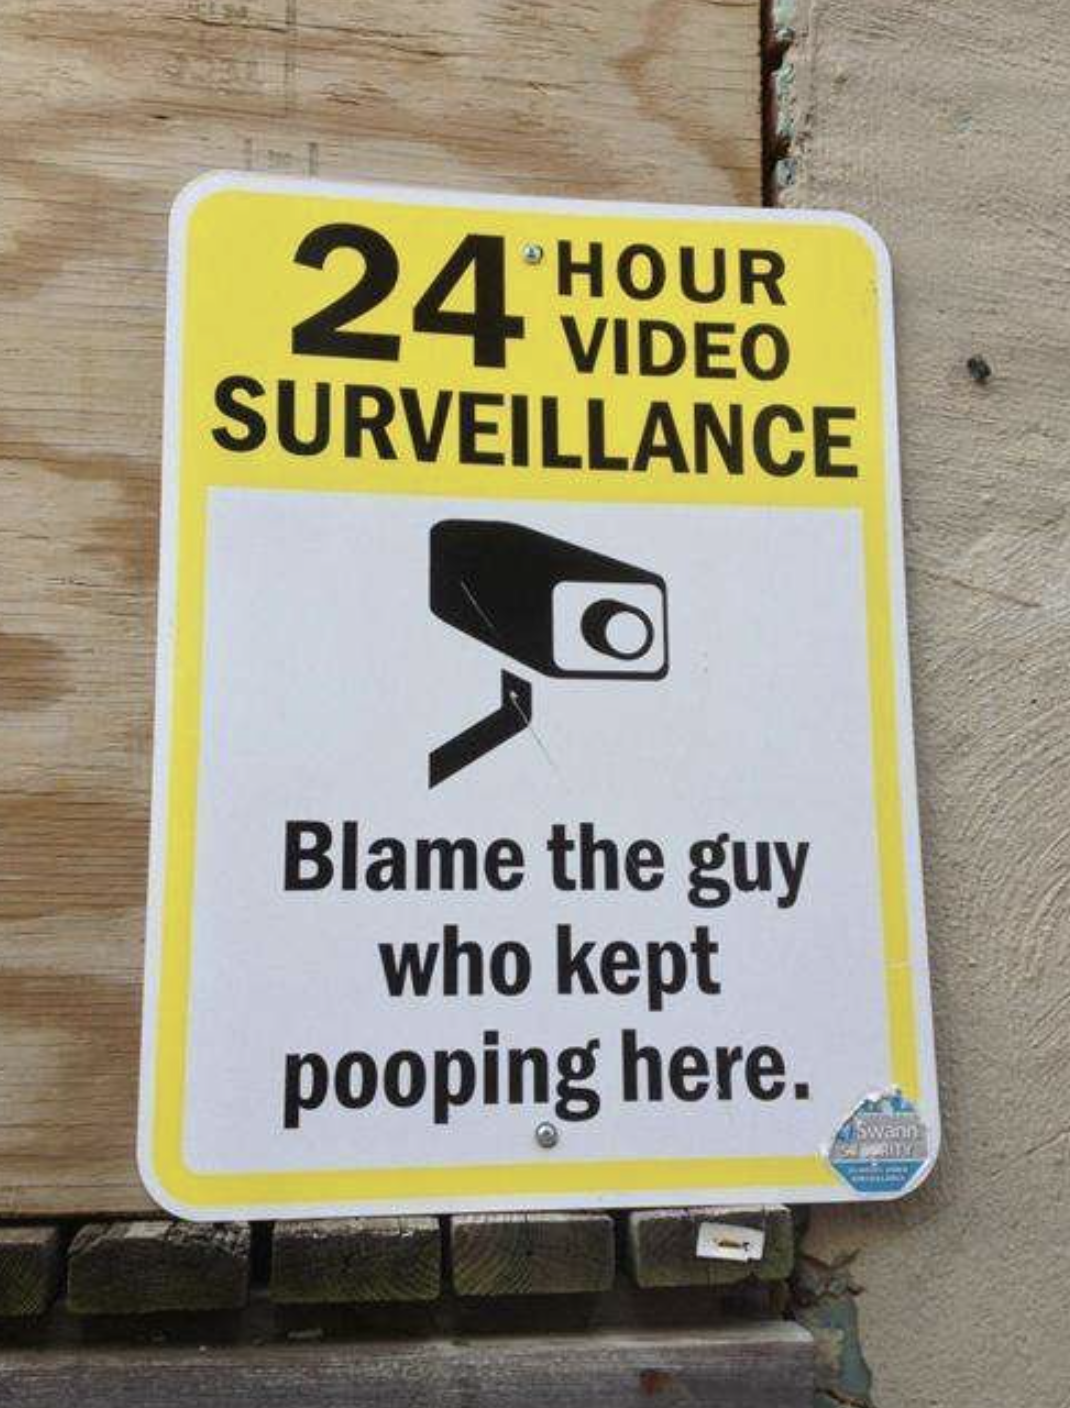 Notice: &quot;24-hour video surveillance: Blame the guy who kept pooping here&quot;